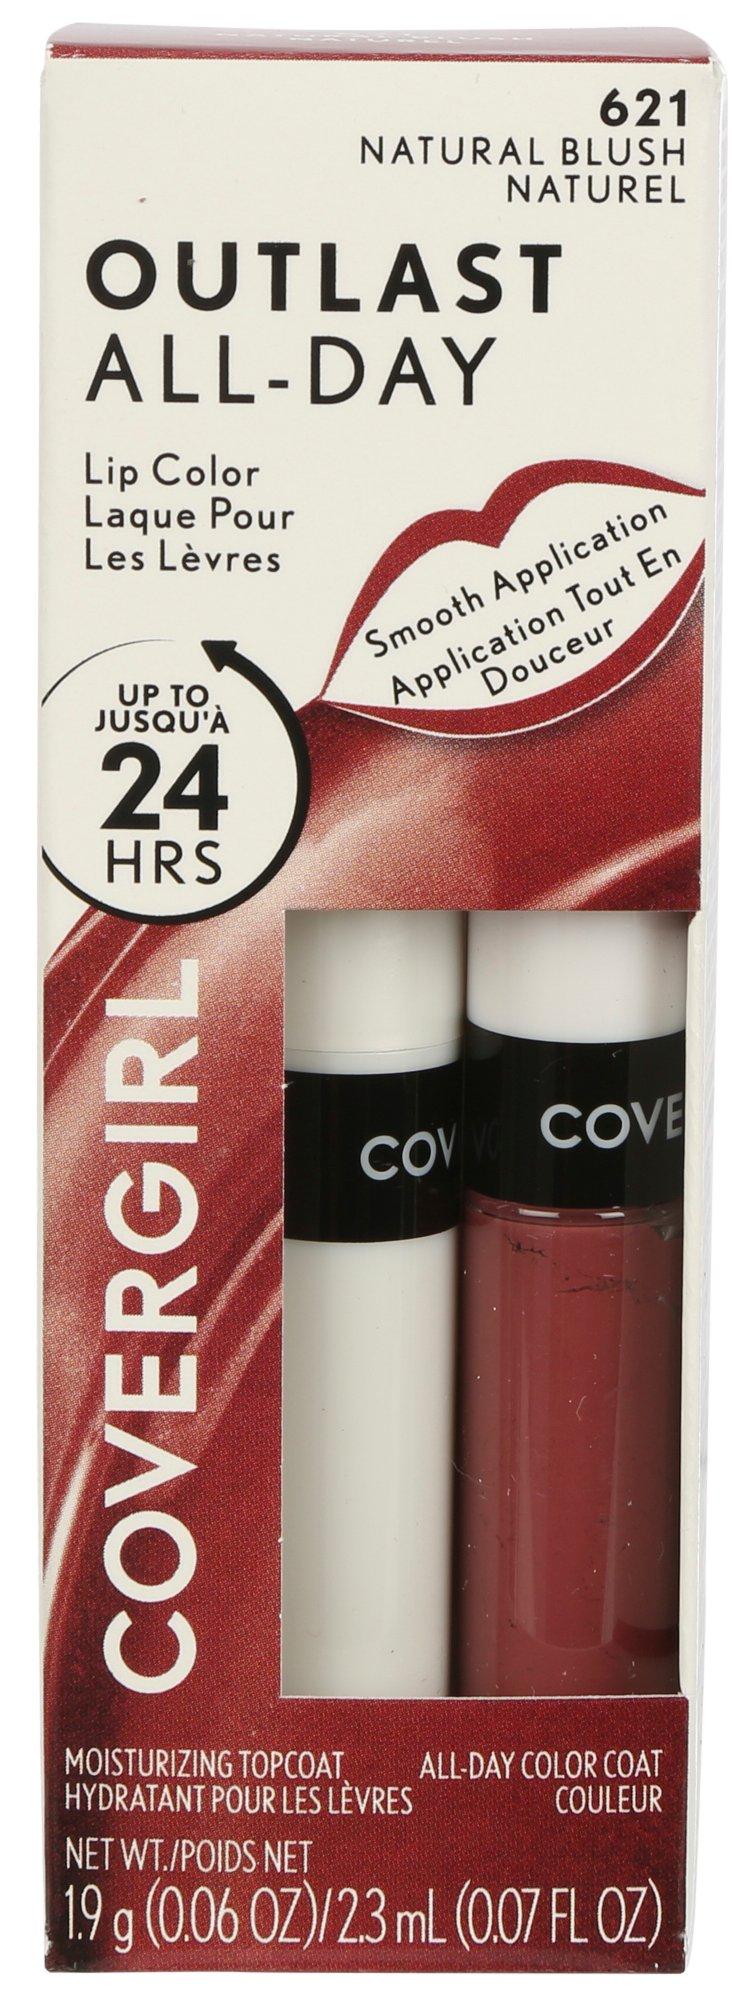 2-Pc. Outlast All-Day Color Coat & Top Coat Set